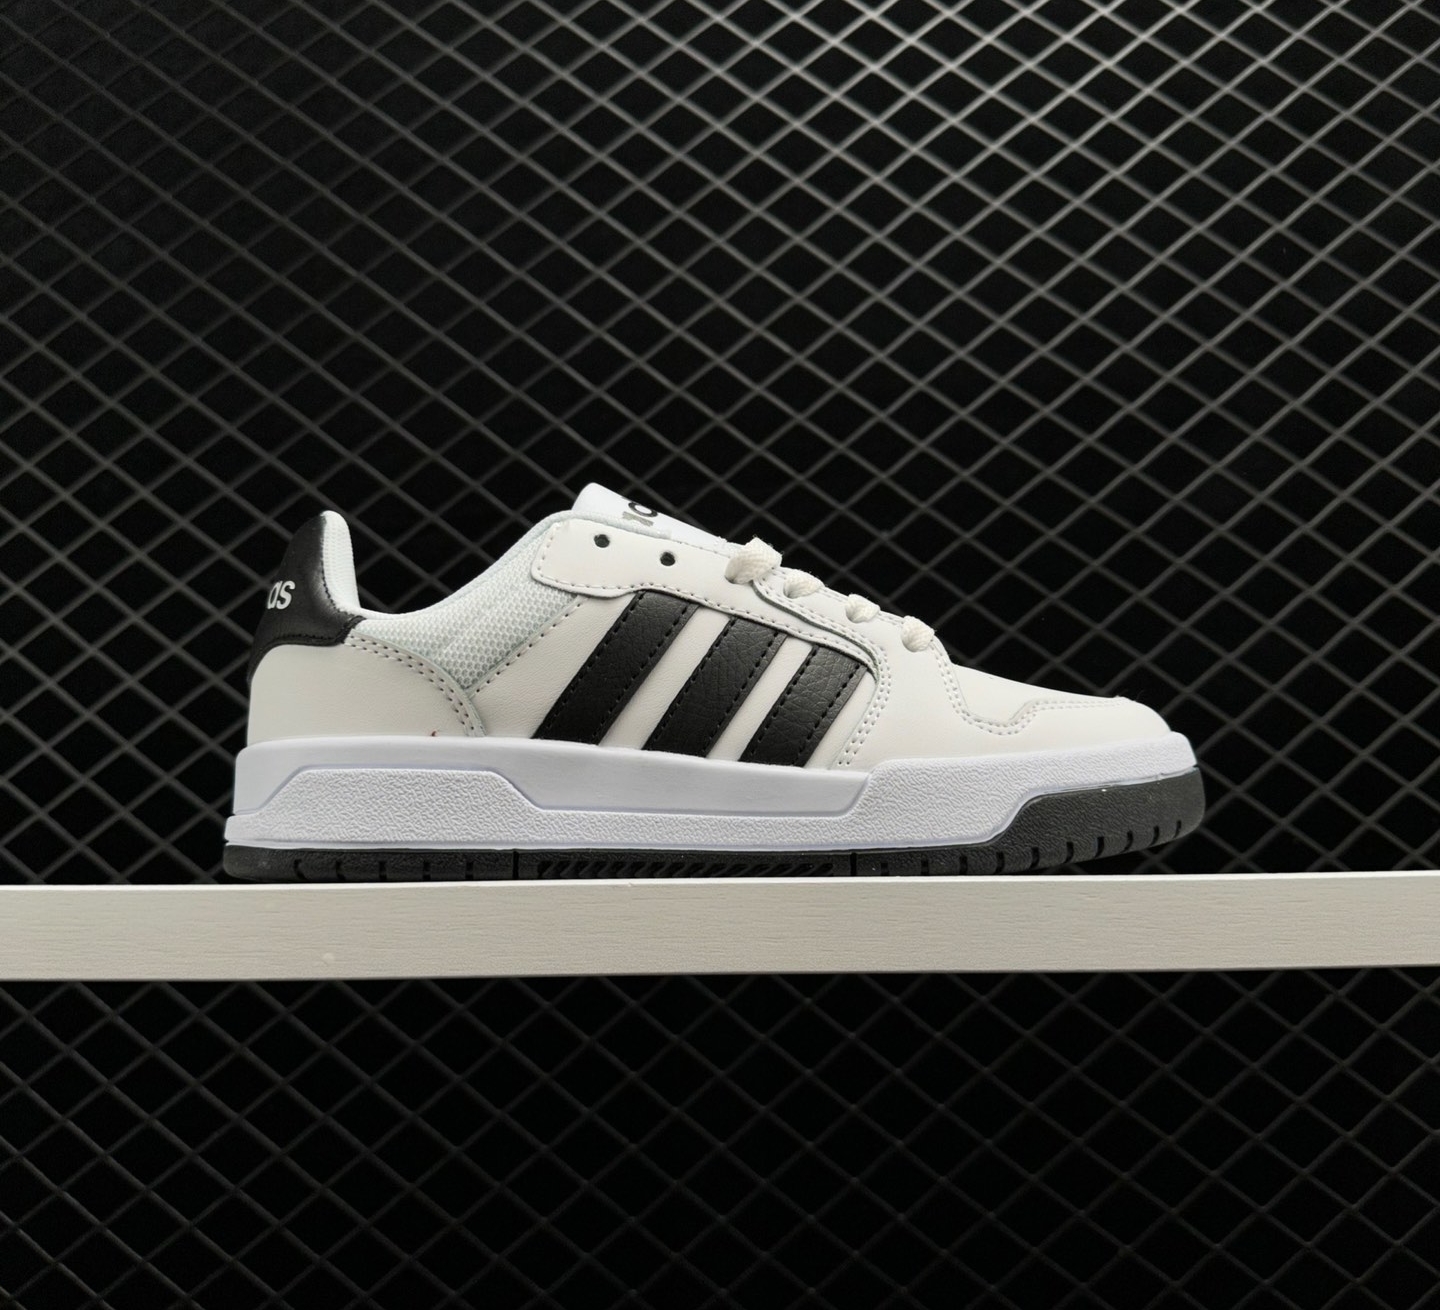 Adidas Neo Entrap White Black - Stylish Sneakers for Men and Women